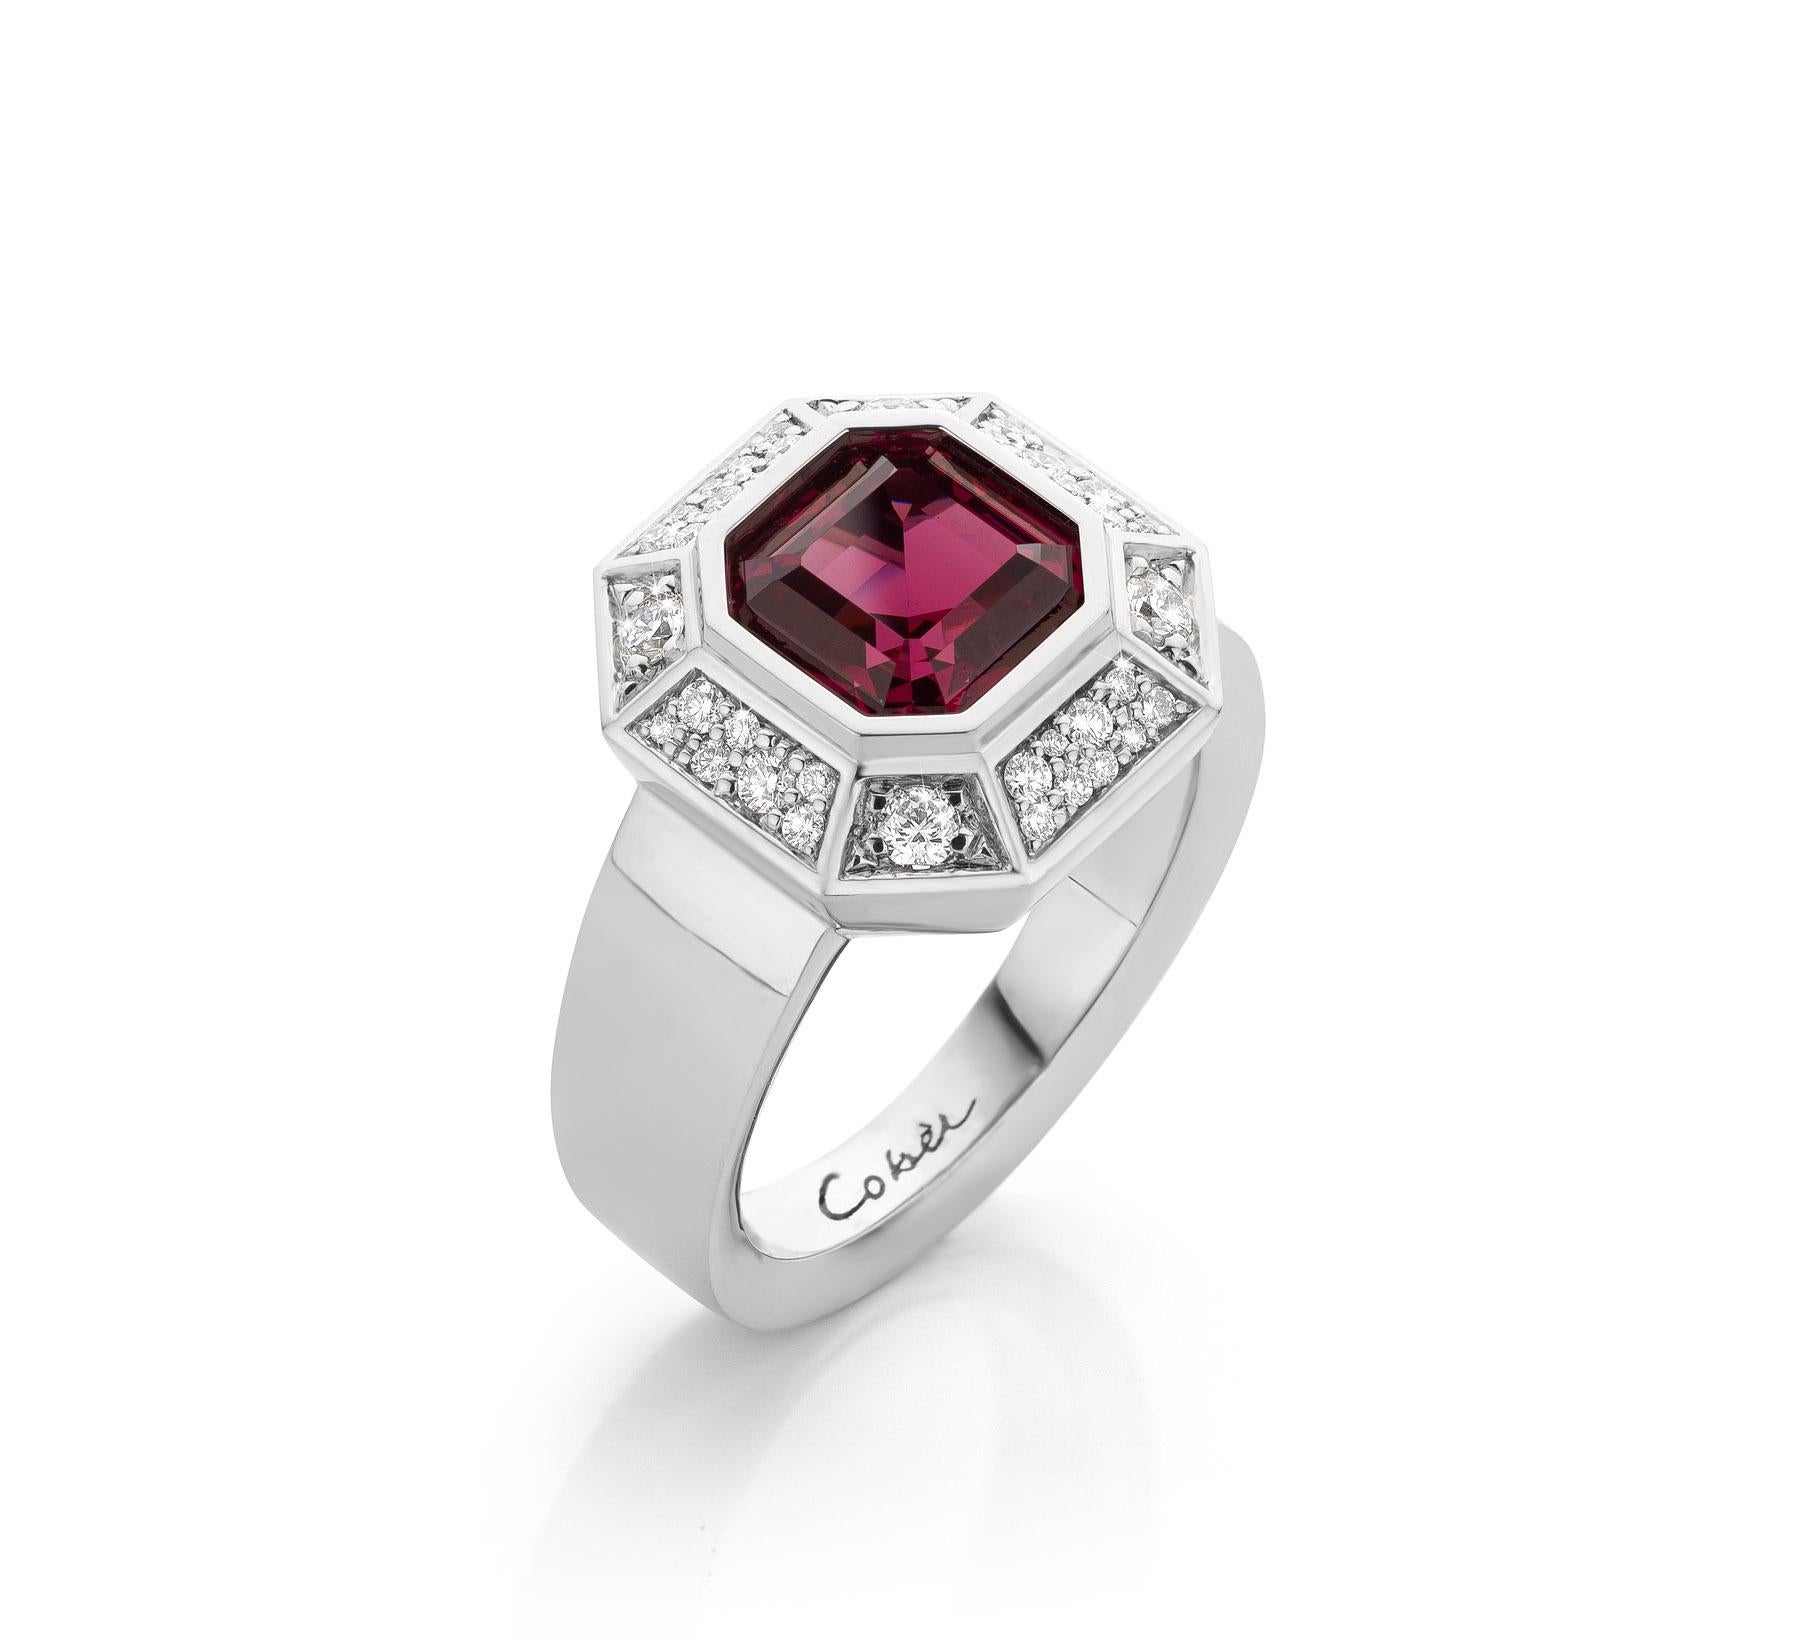 Women's Cober “Catharina” 18K white gold ring with a Asscher-cut Garnet and 30 Diamonds For Sale